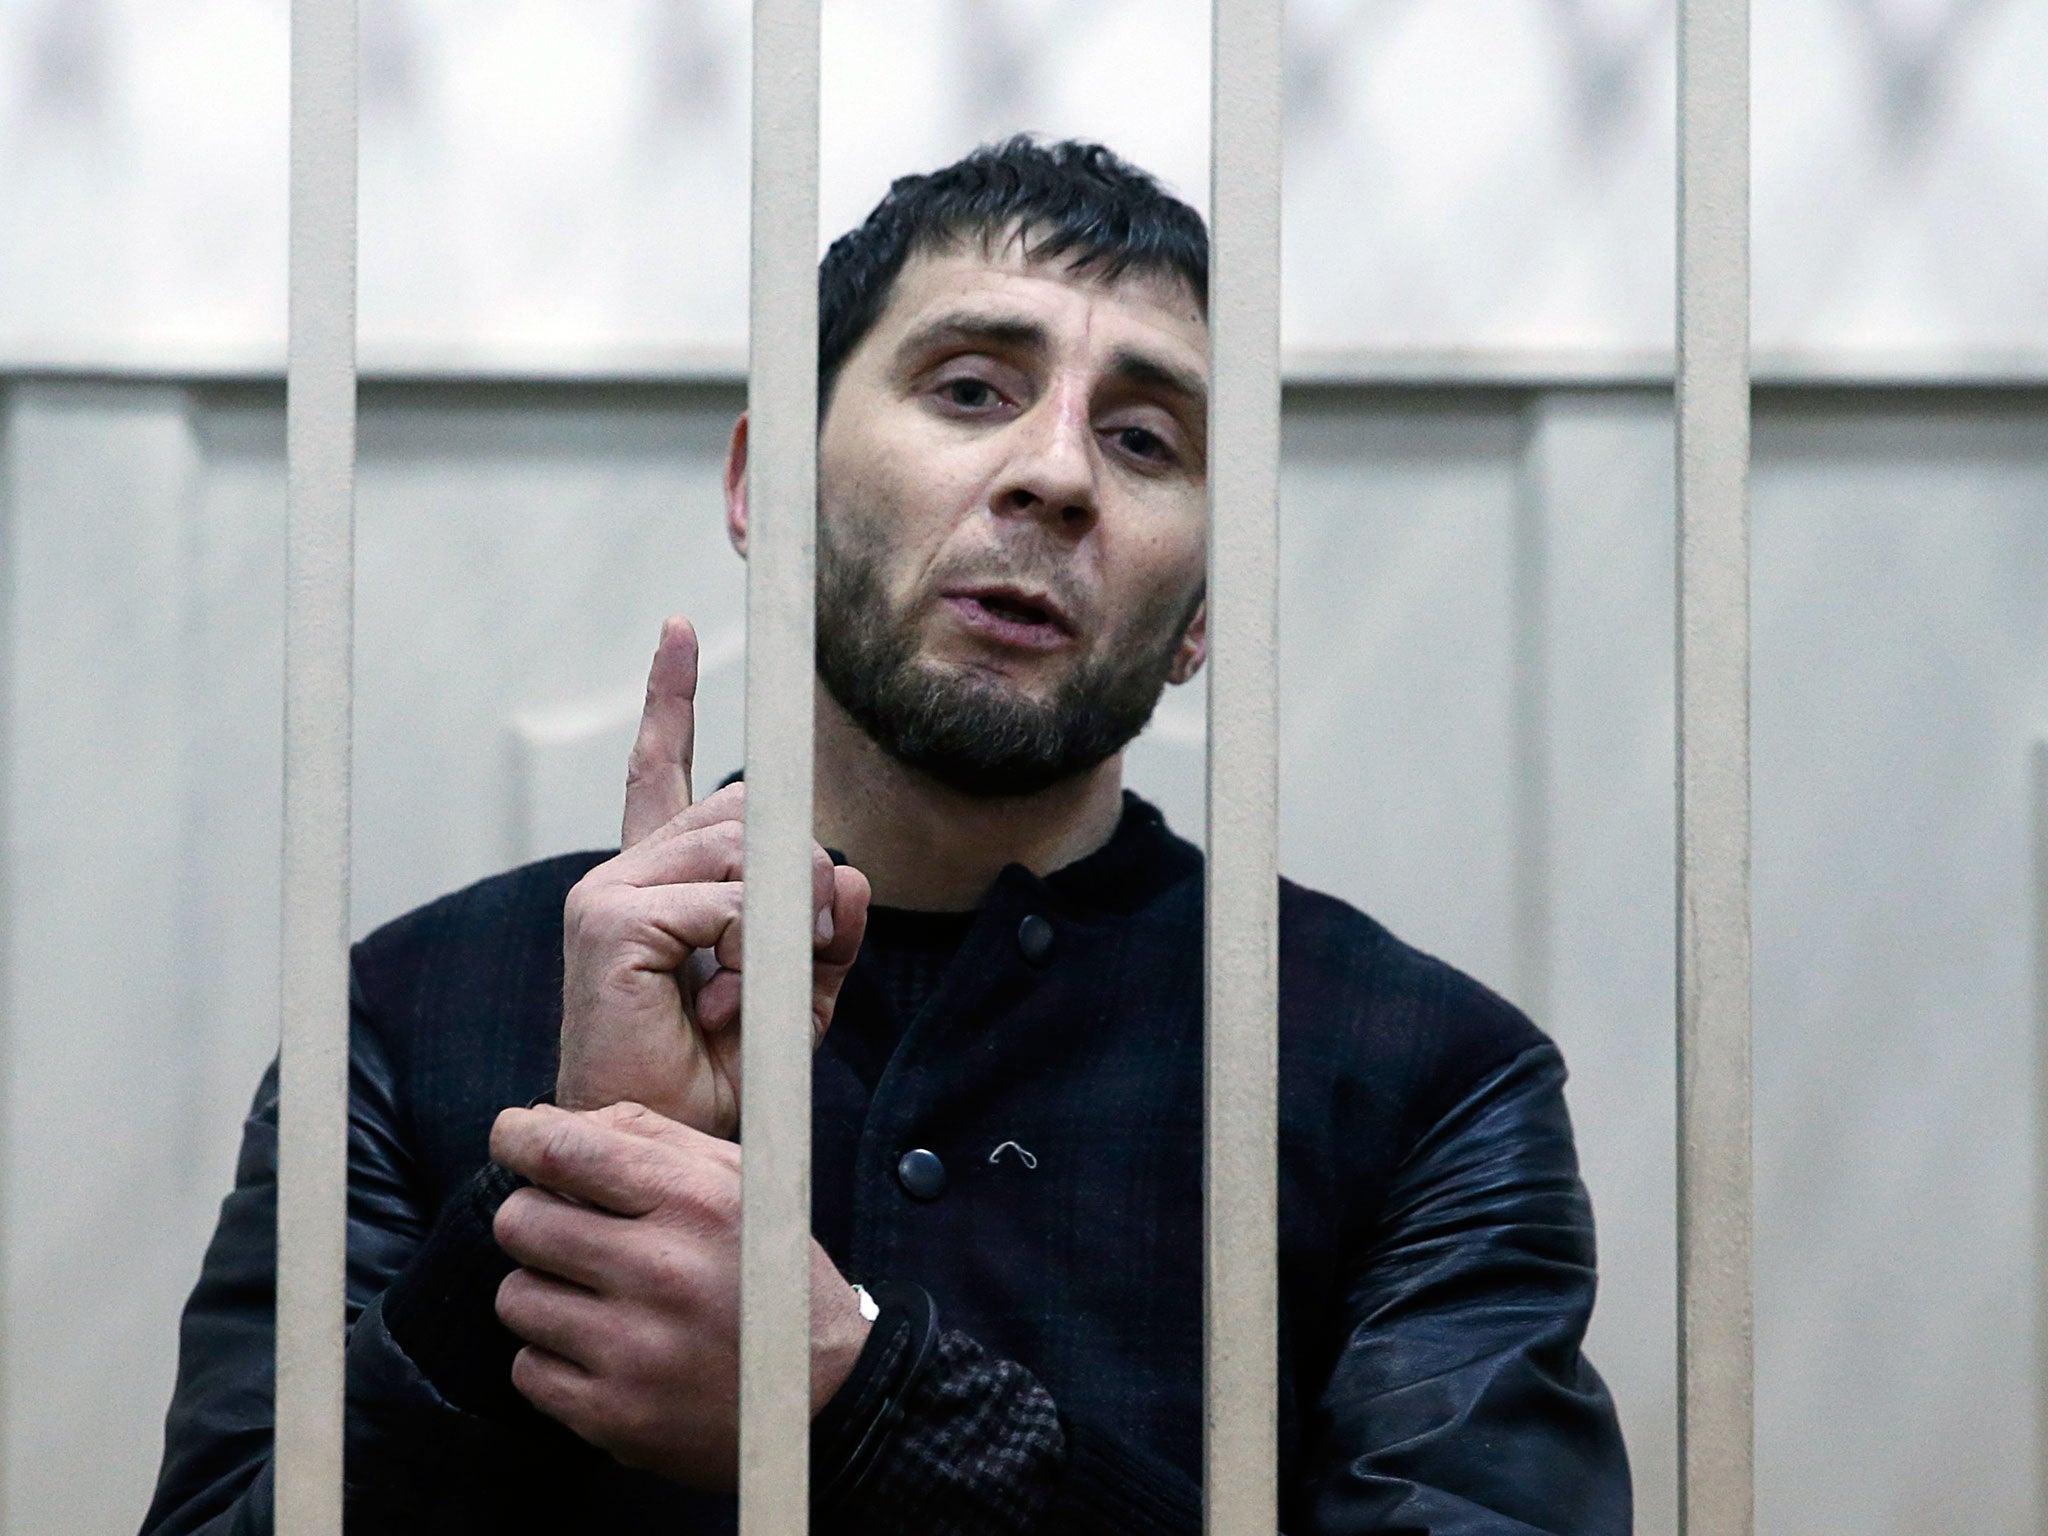 Zaur Dadayev, charged with involvement in the murder of Russian opposition figure Boris Nemtsov, speaks inside a defendants' cage in Moscow